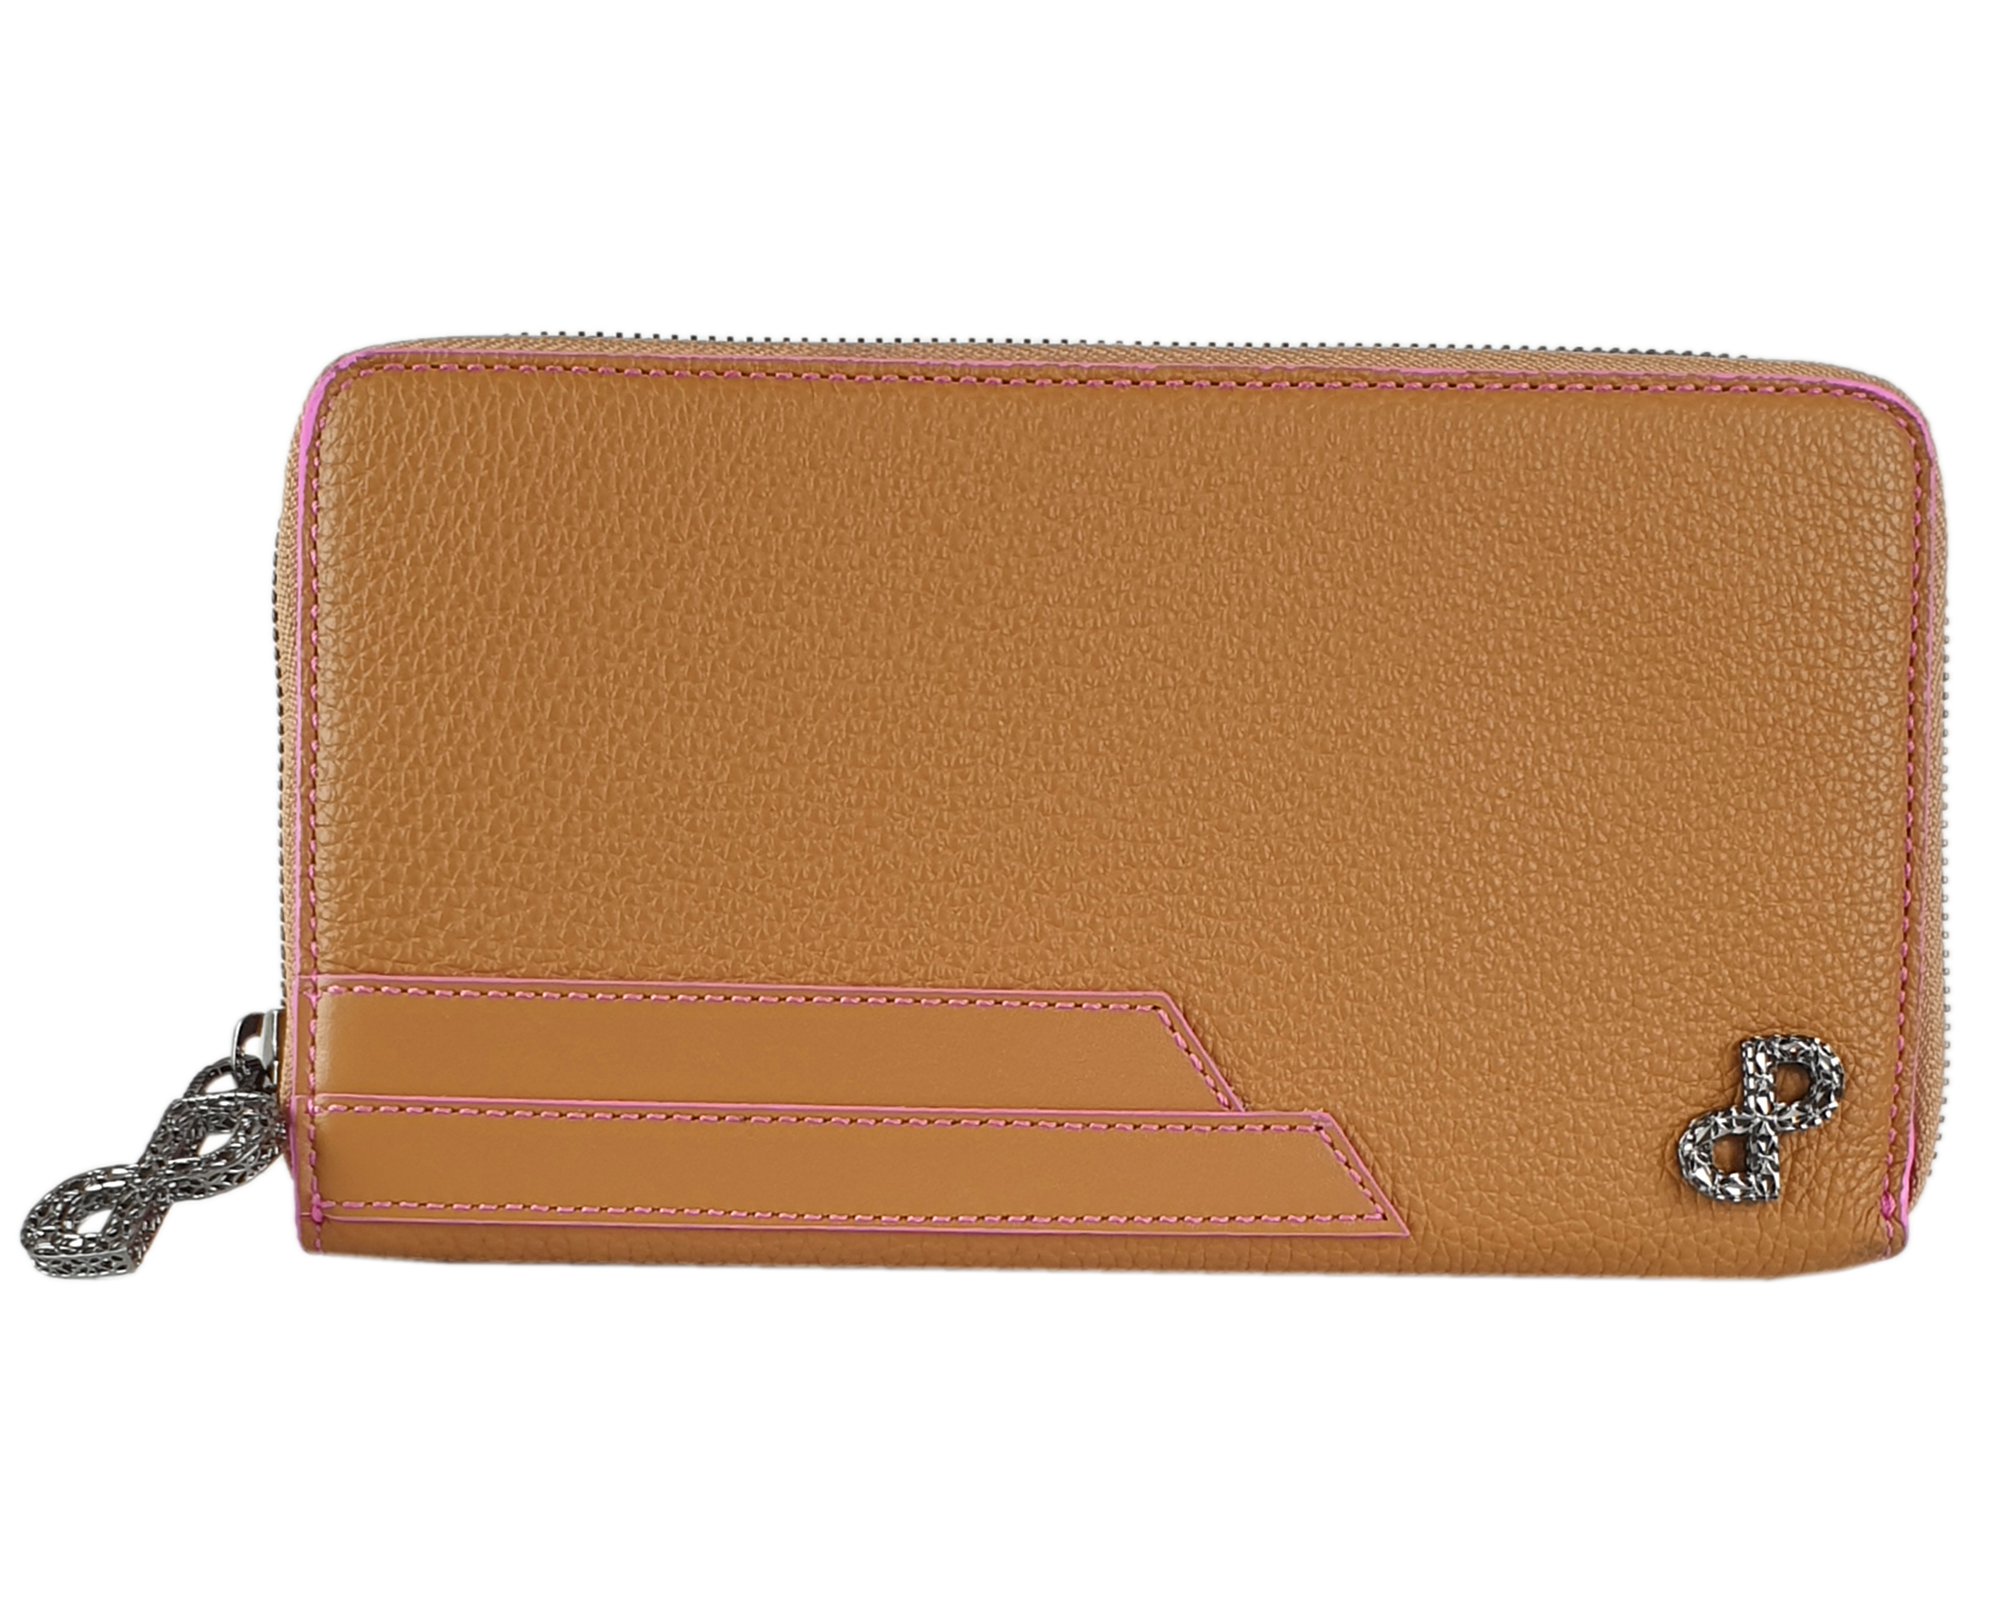 LUCILLA is an icon of sophistication you can always carry with you from day to evening.